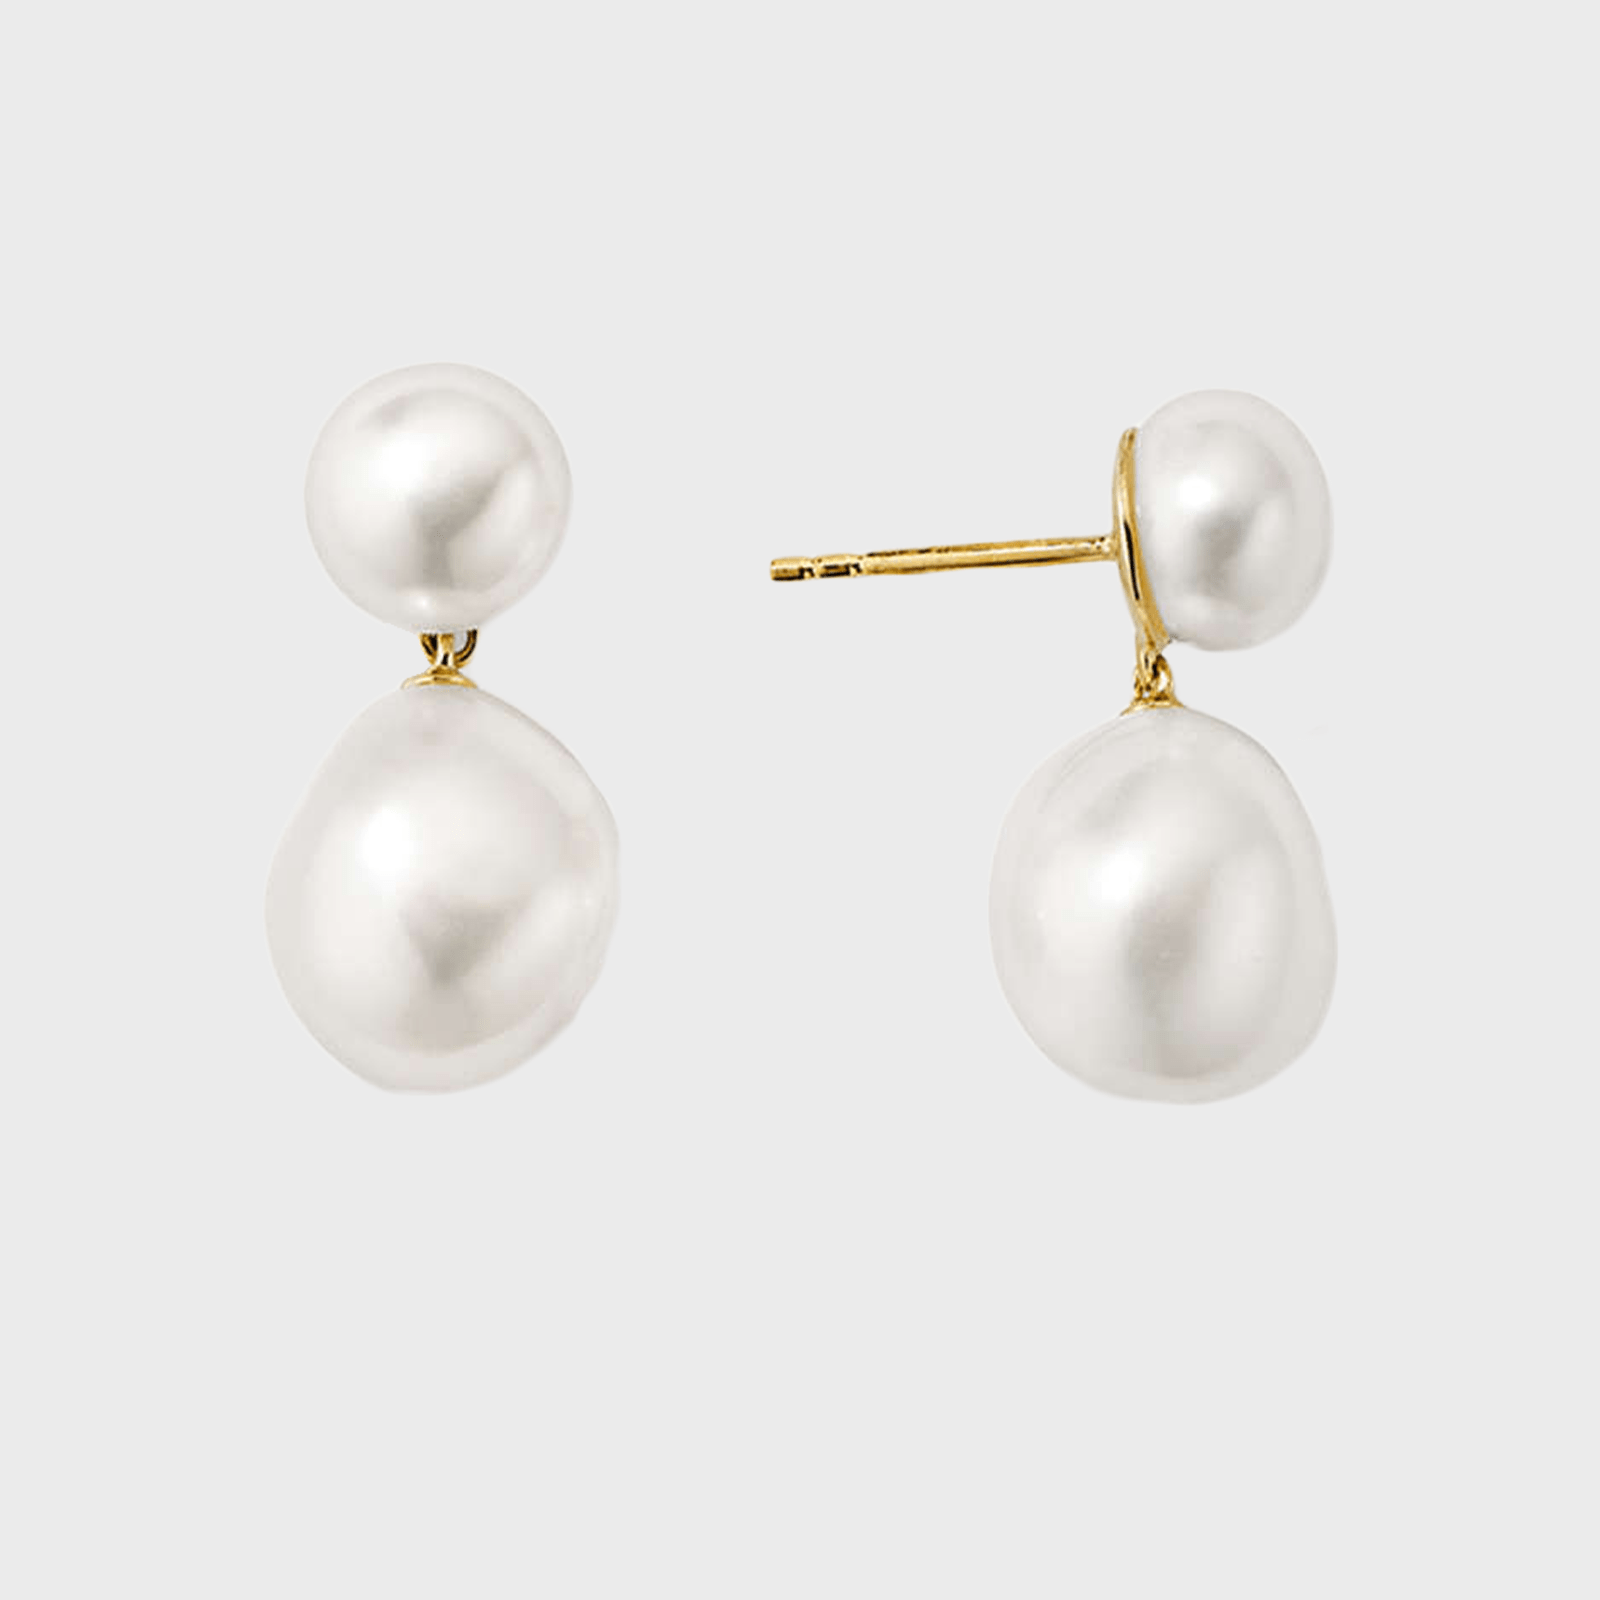 9 Best Earrings for Every Outfit, Affordable Jewelry, Fine Jewelry and More